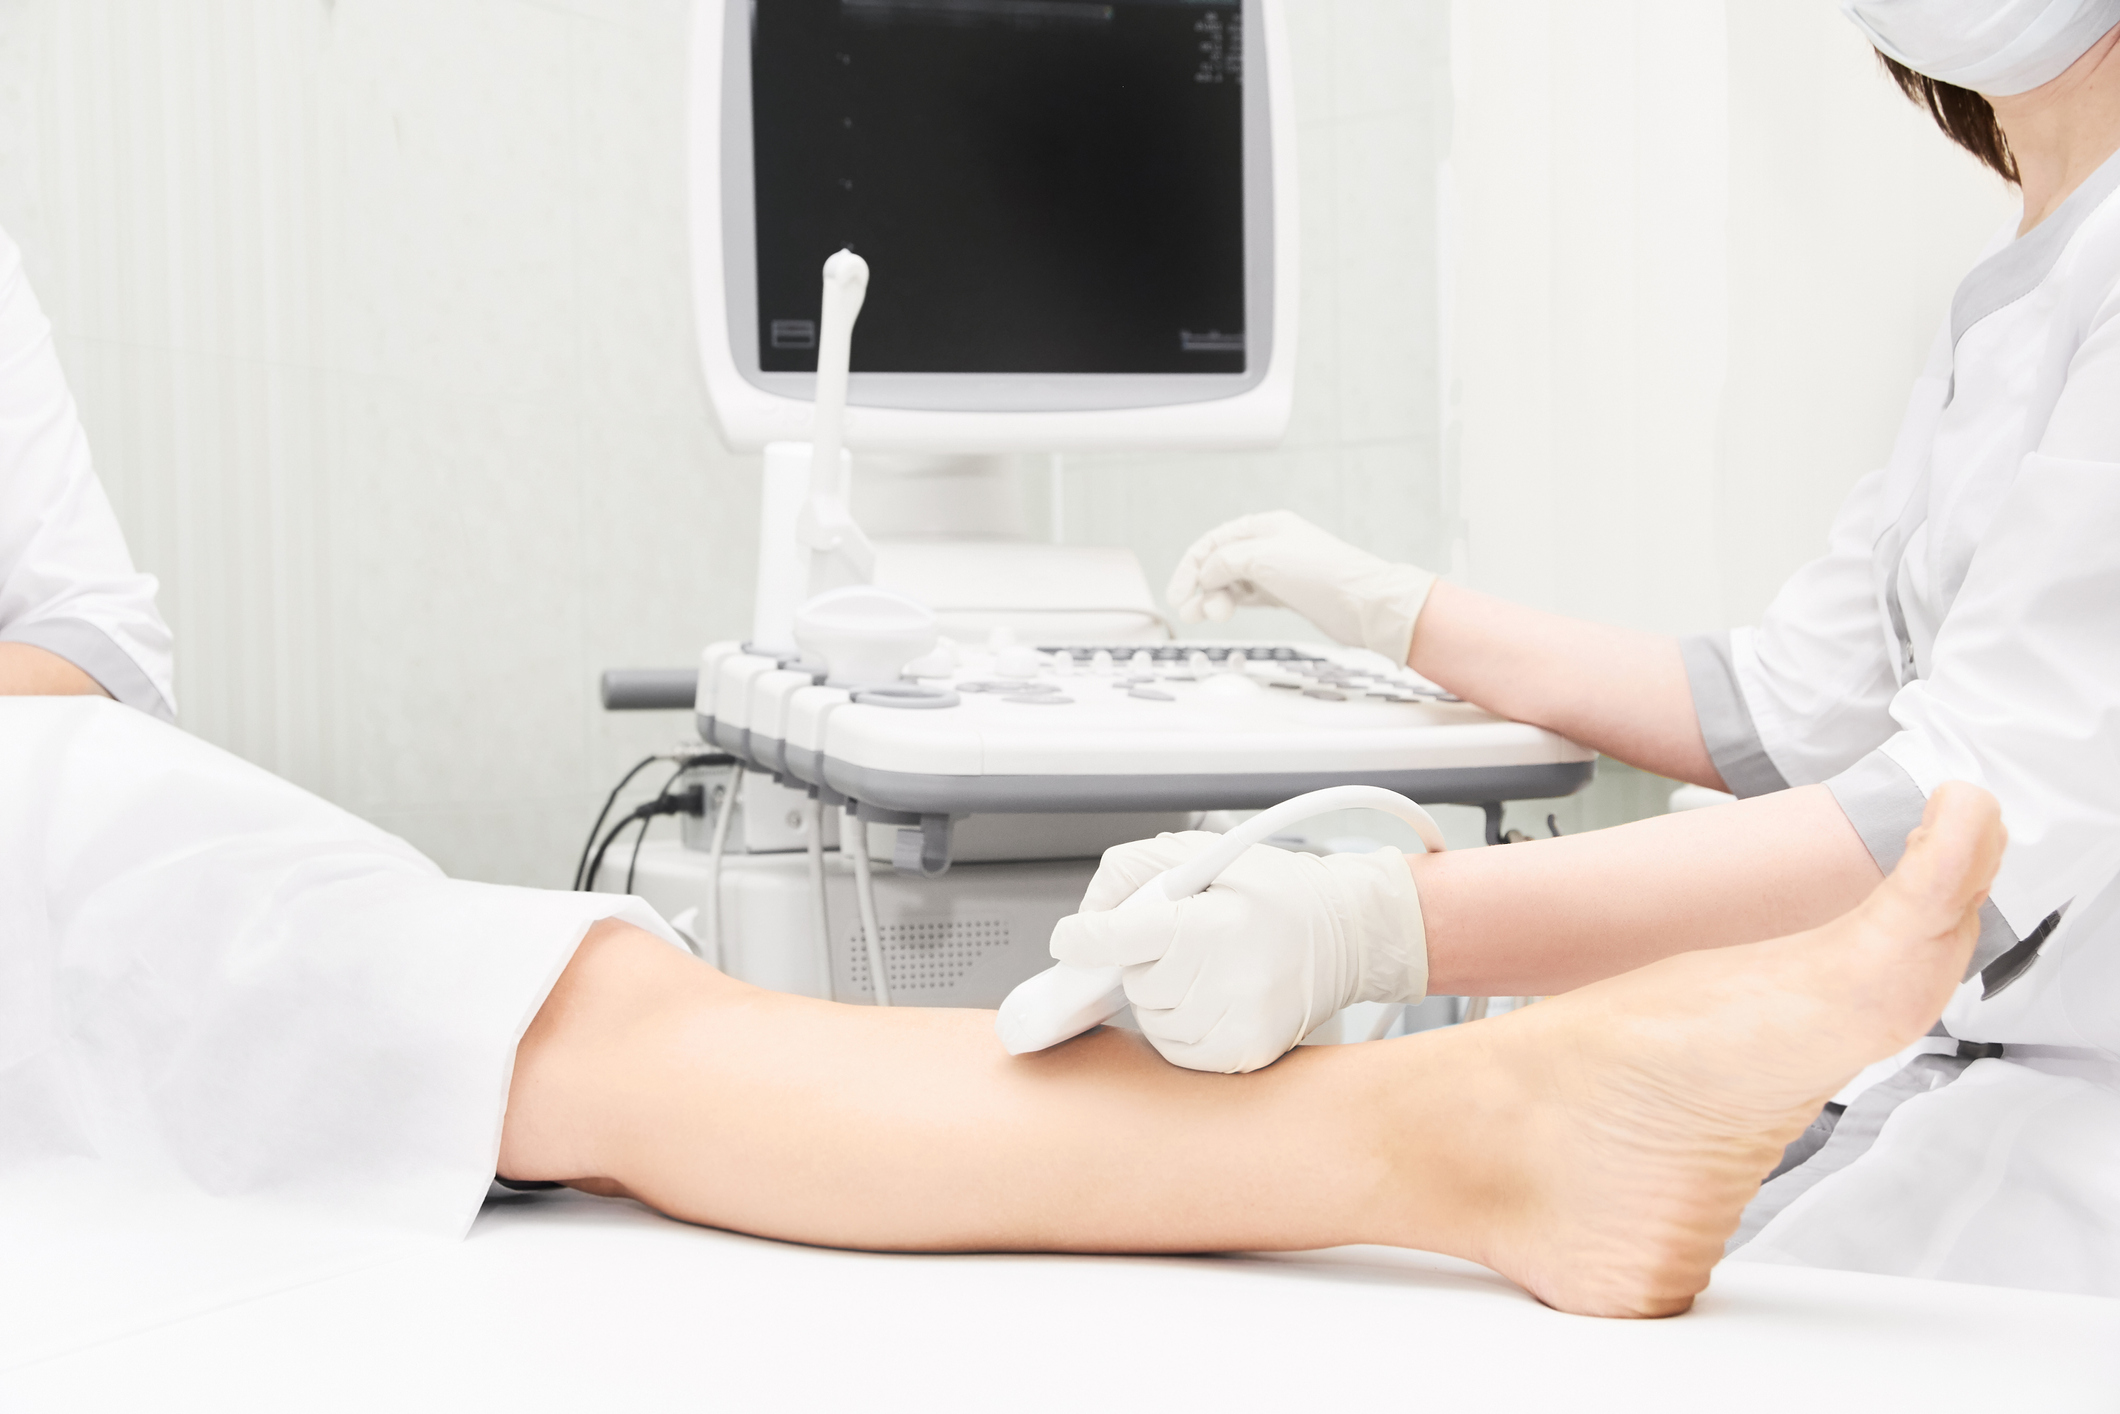 Doctor performing an ultrasound test on patient's leg